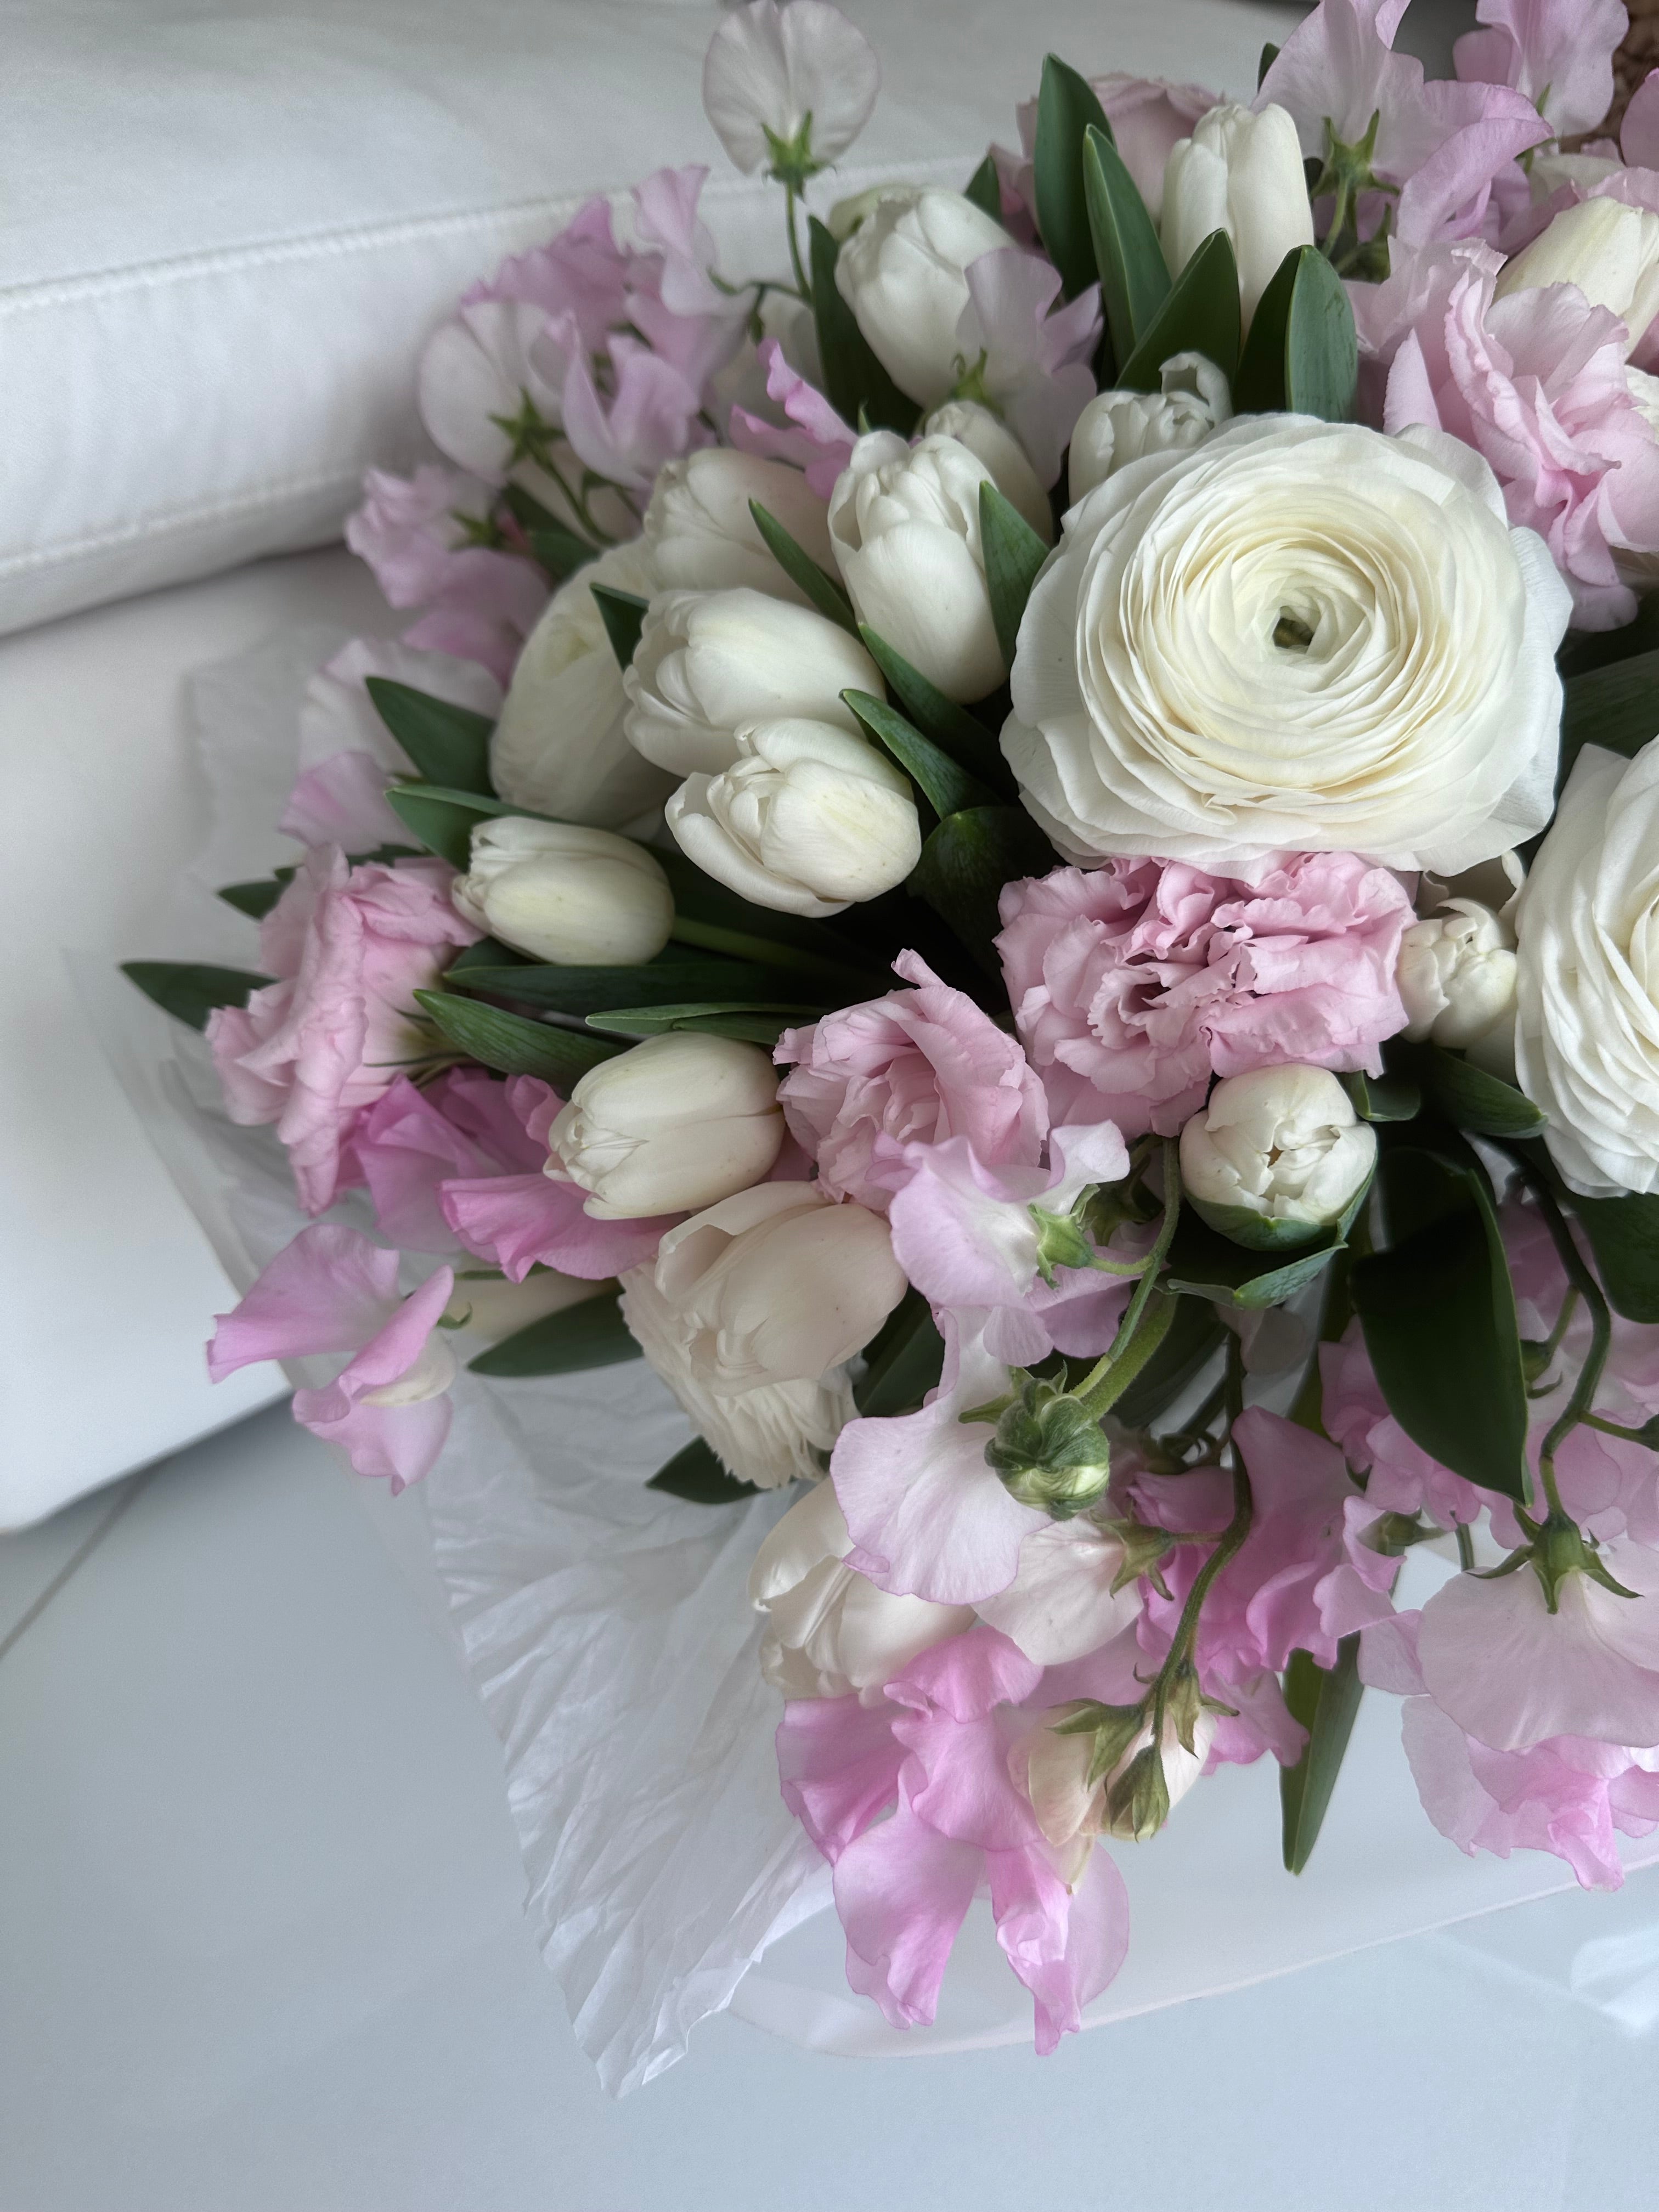 Pink charm - Beautiful bouquet of delicate spring tulips, ranunculus, lisianthus and sweet peas.